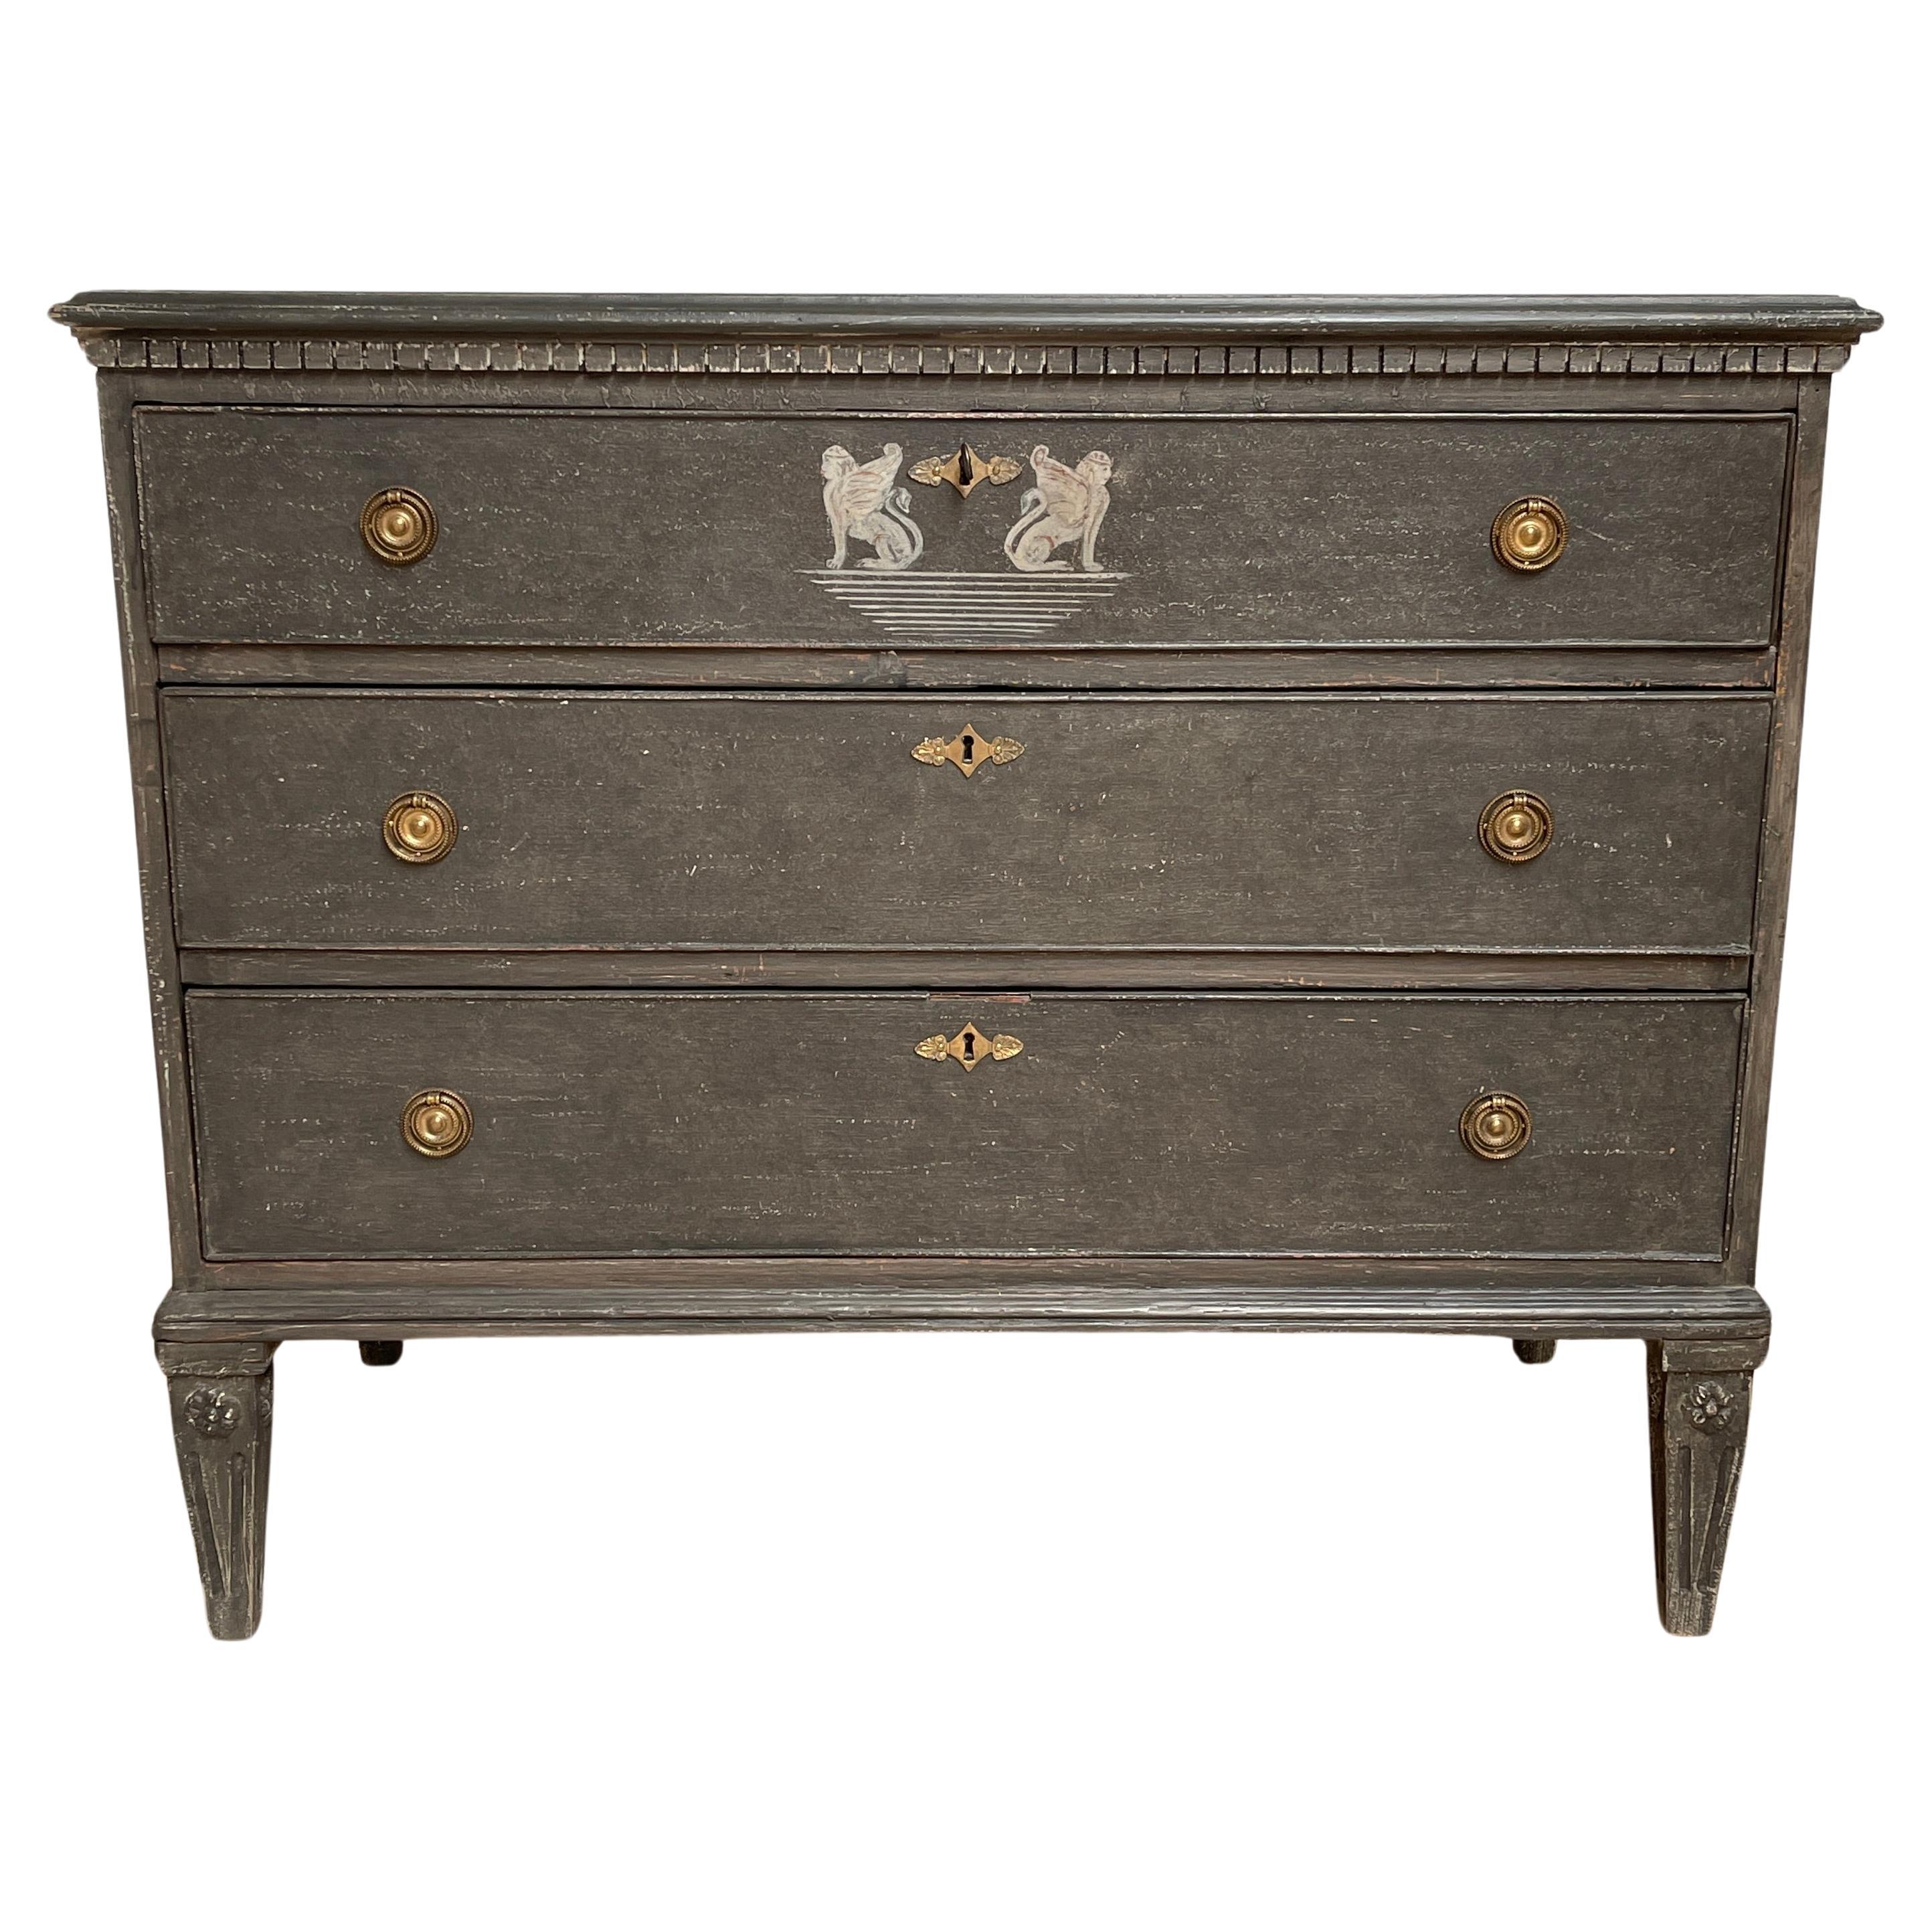 Gustavian Painted Commode Chest of Drawers, Sweden

Hand painted Gustavian style chest of drawers constructed from solid wood with a hand-applied distressed finish with brass ring hardware. Wonderful details including dental molding below the solid